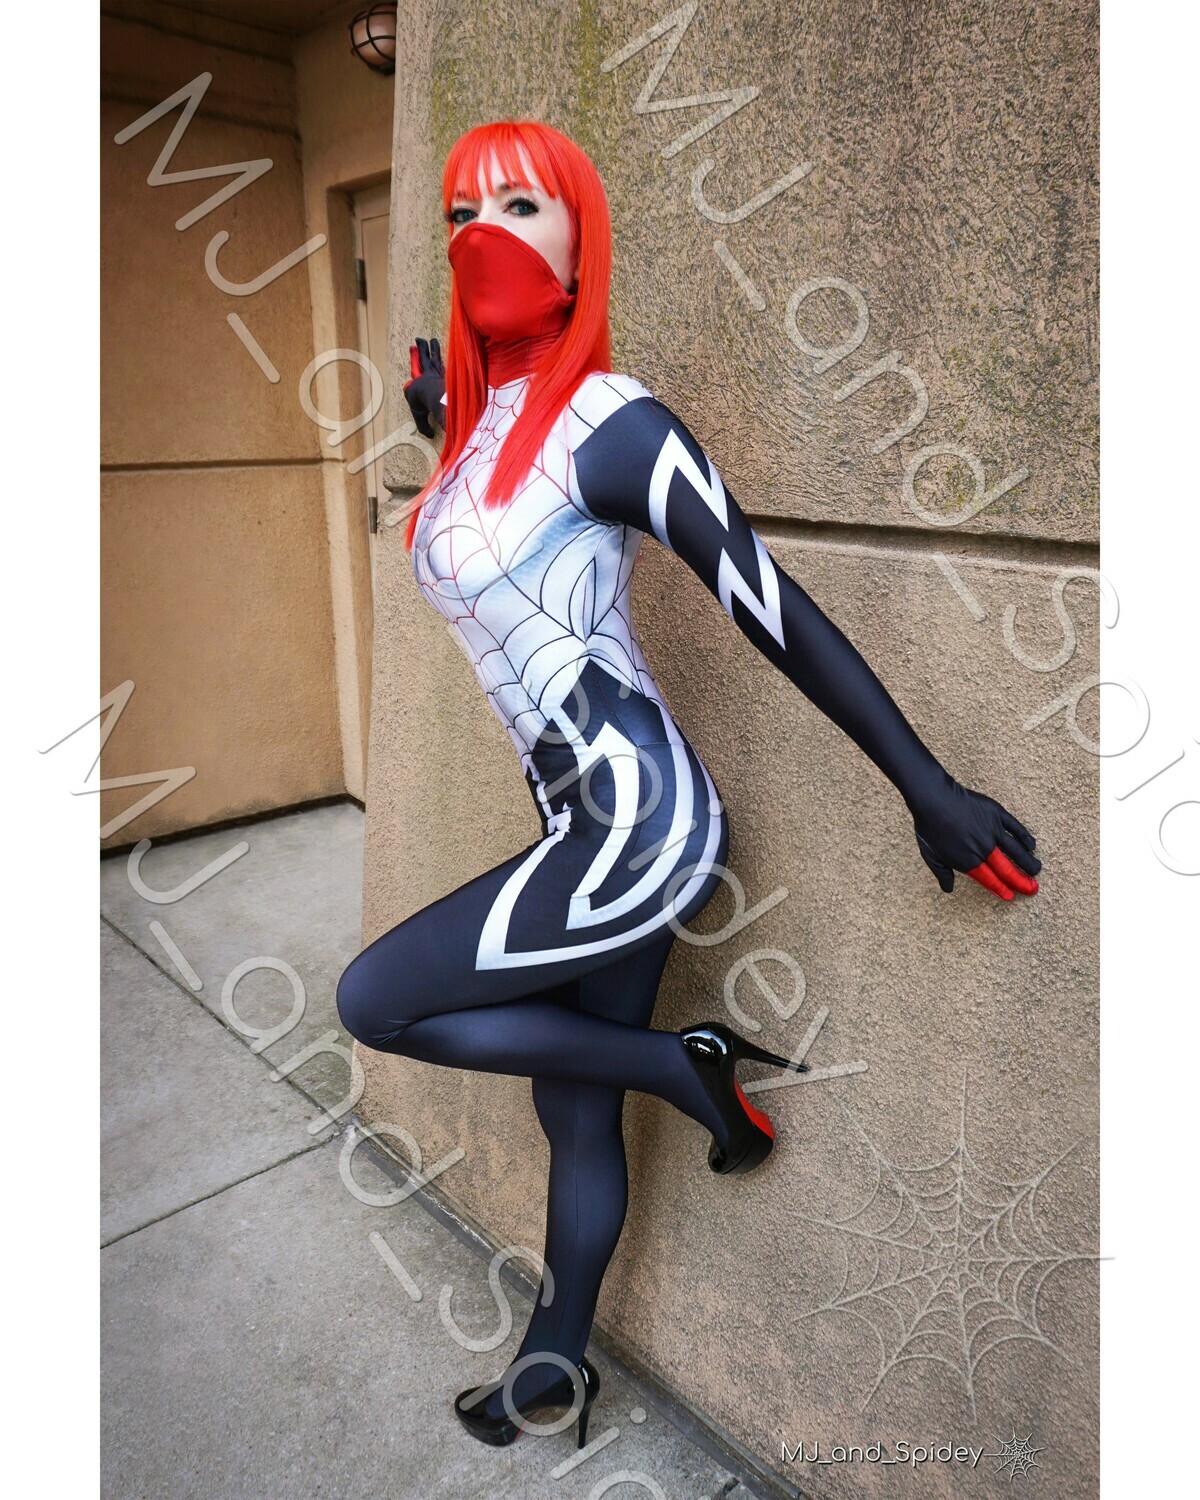 Marvel - Spider-Man - Mary Jane Watson - Silk 3 - Cosplay Print (@MJ_and_Spidey, MJ and Spidey, Comics)